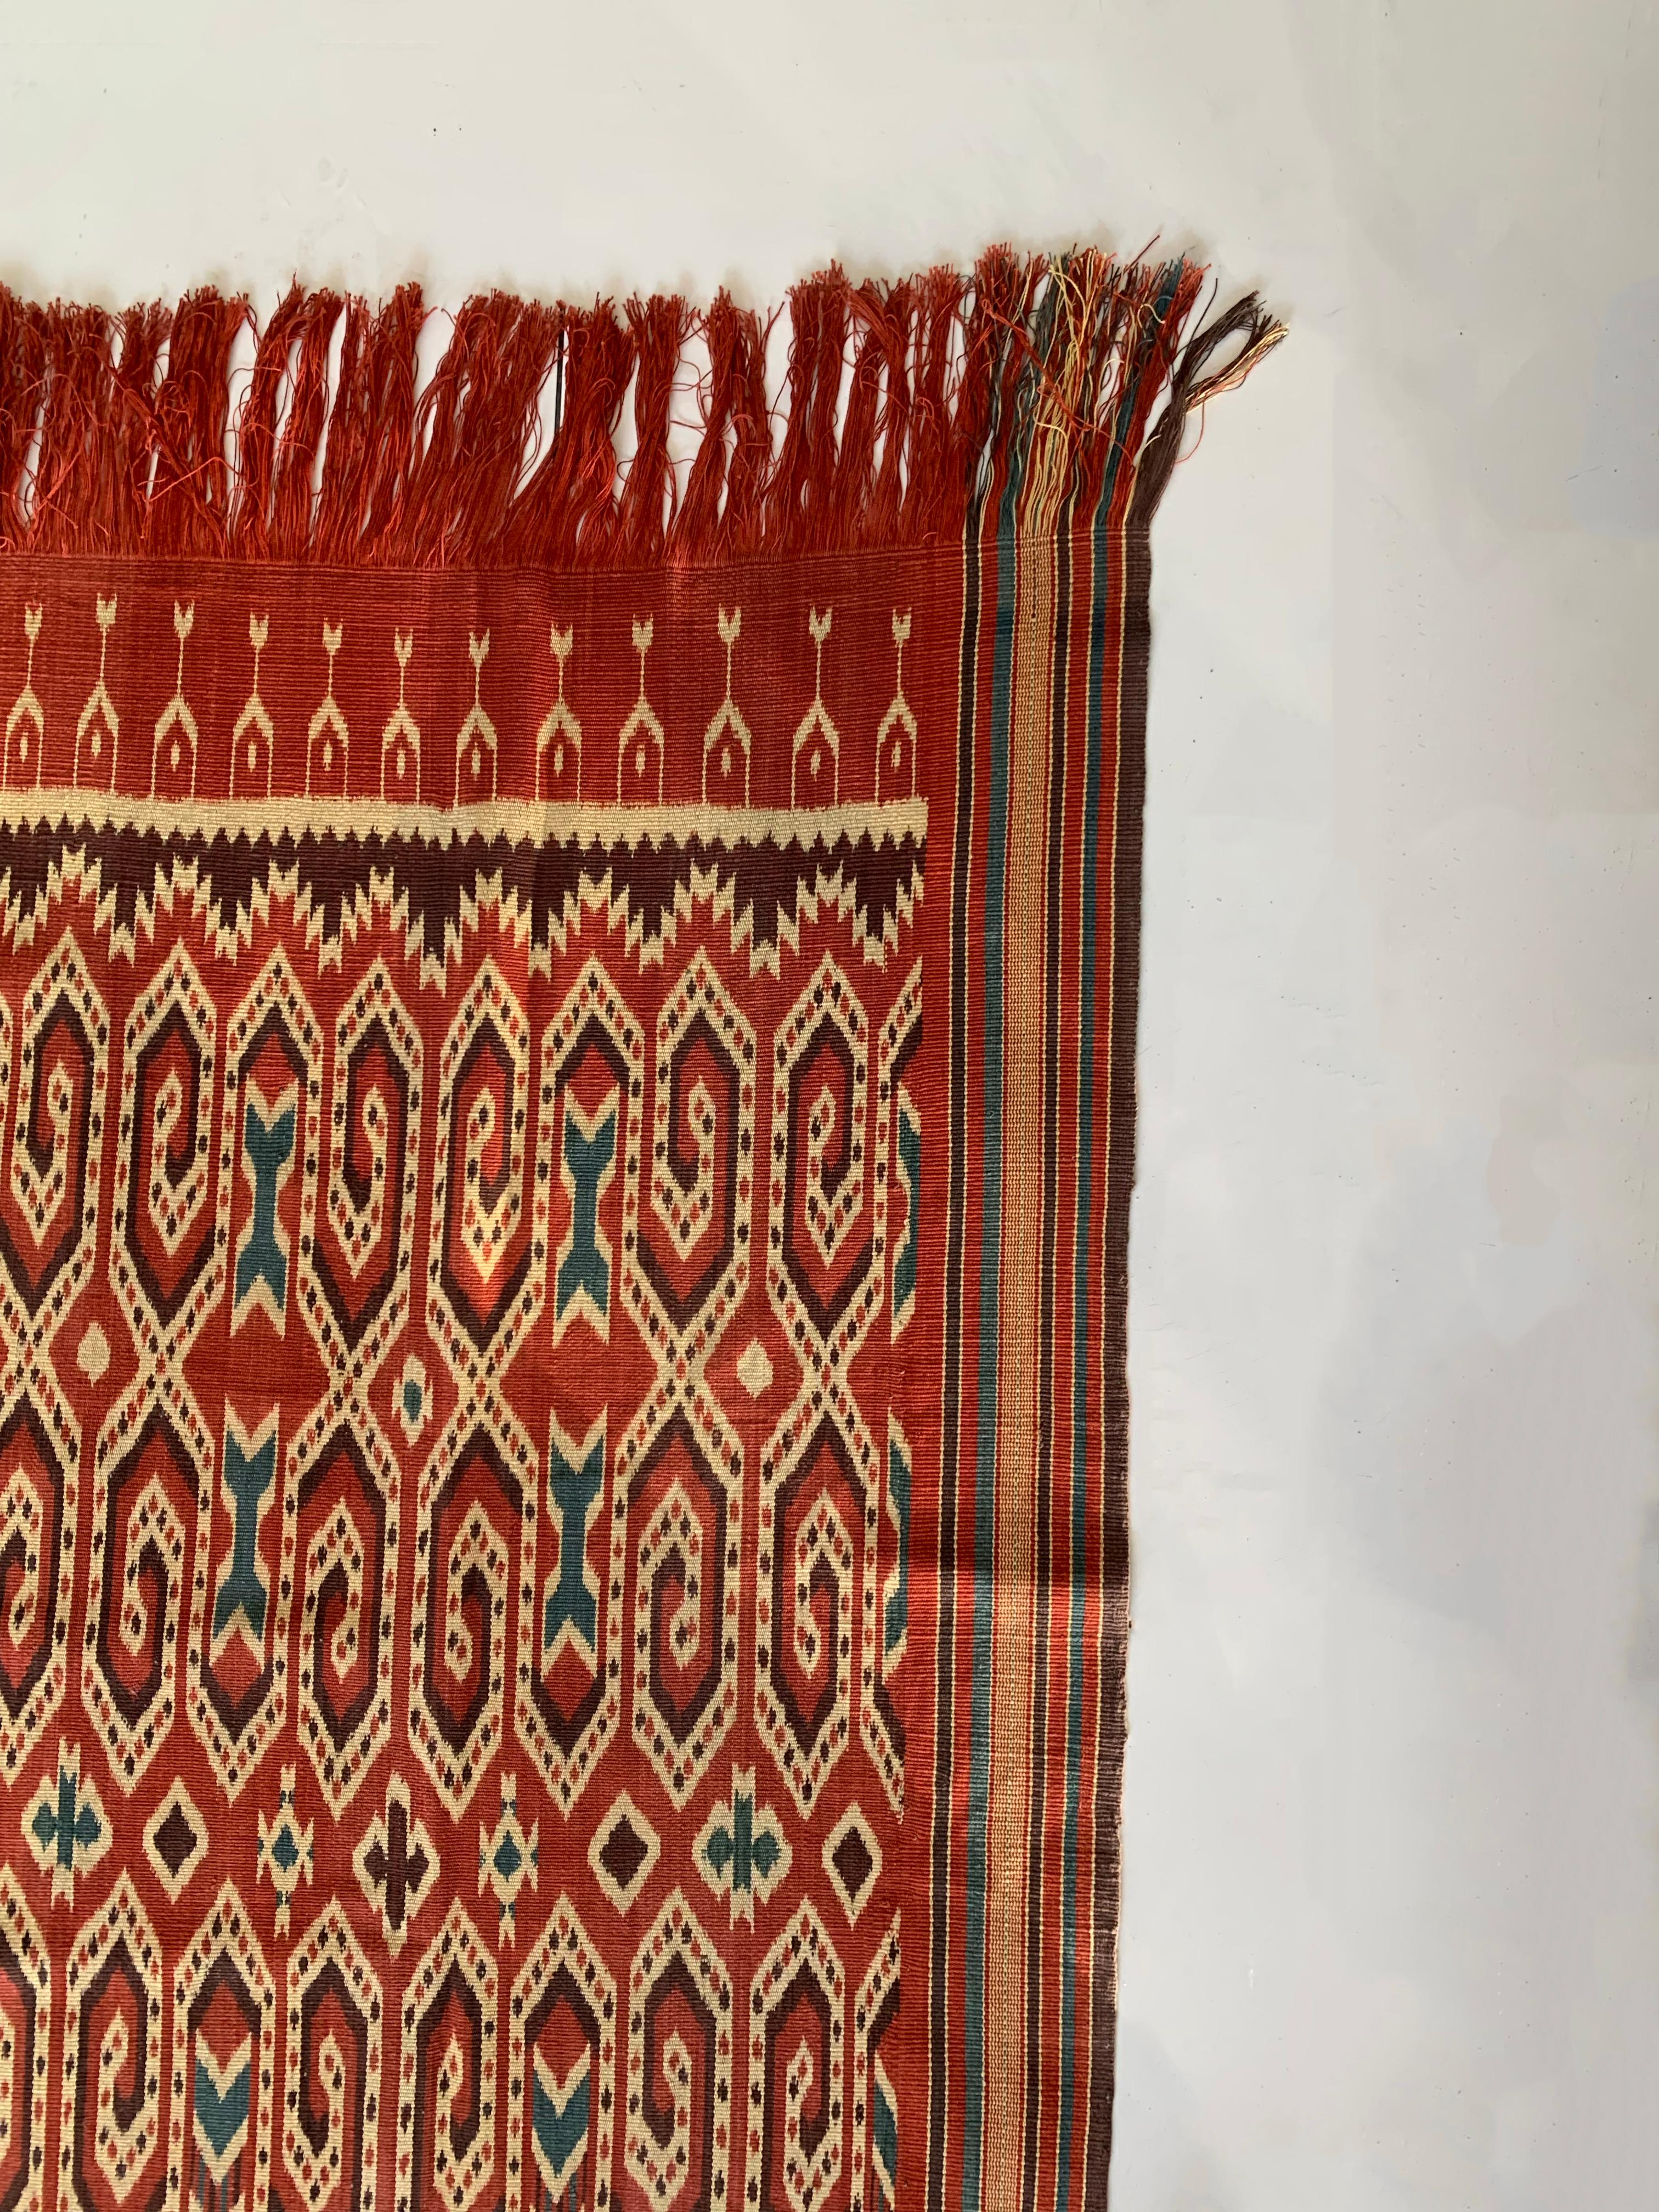 Other Ikat Textile from Toraja Tribe of  Sulawesi with Stunning Tribal Motifs